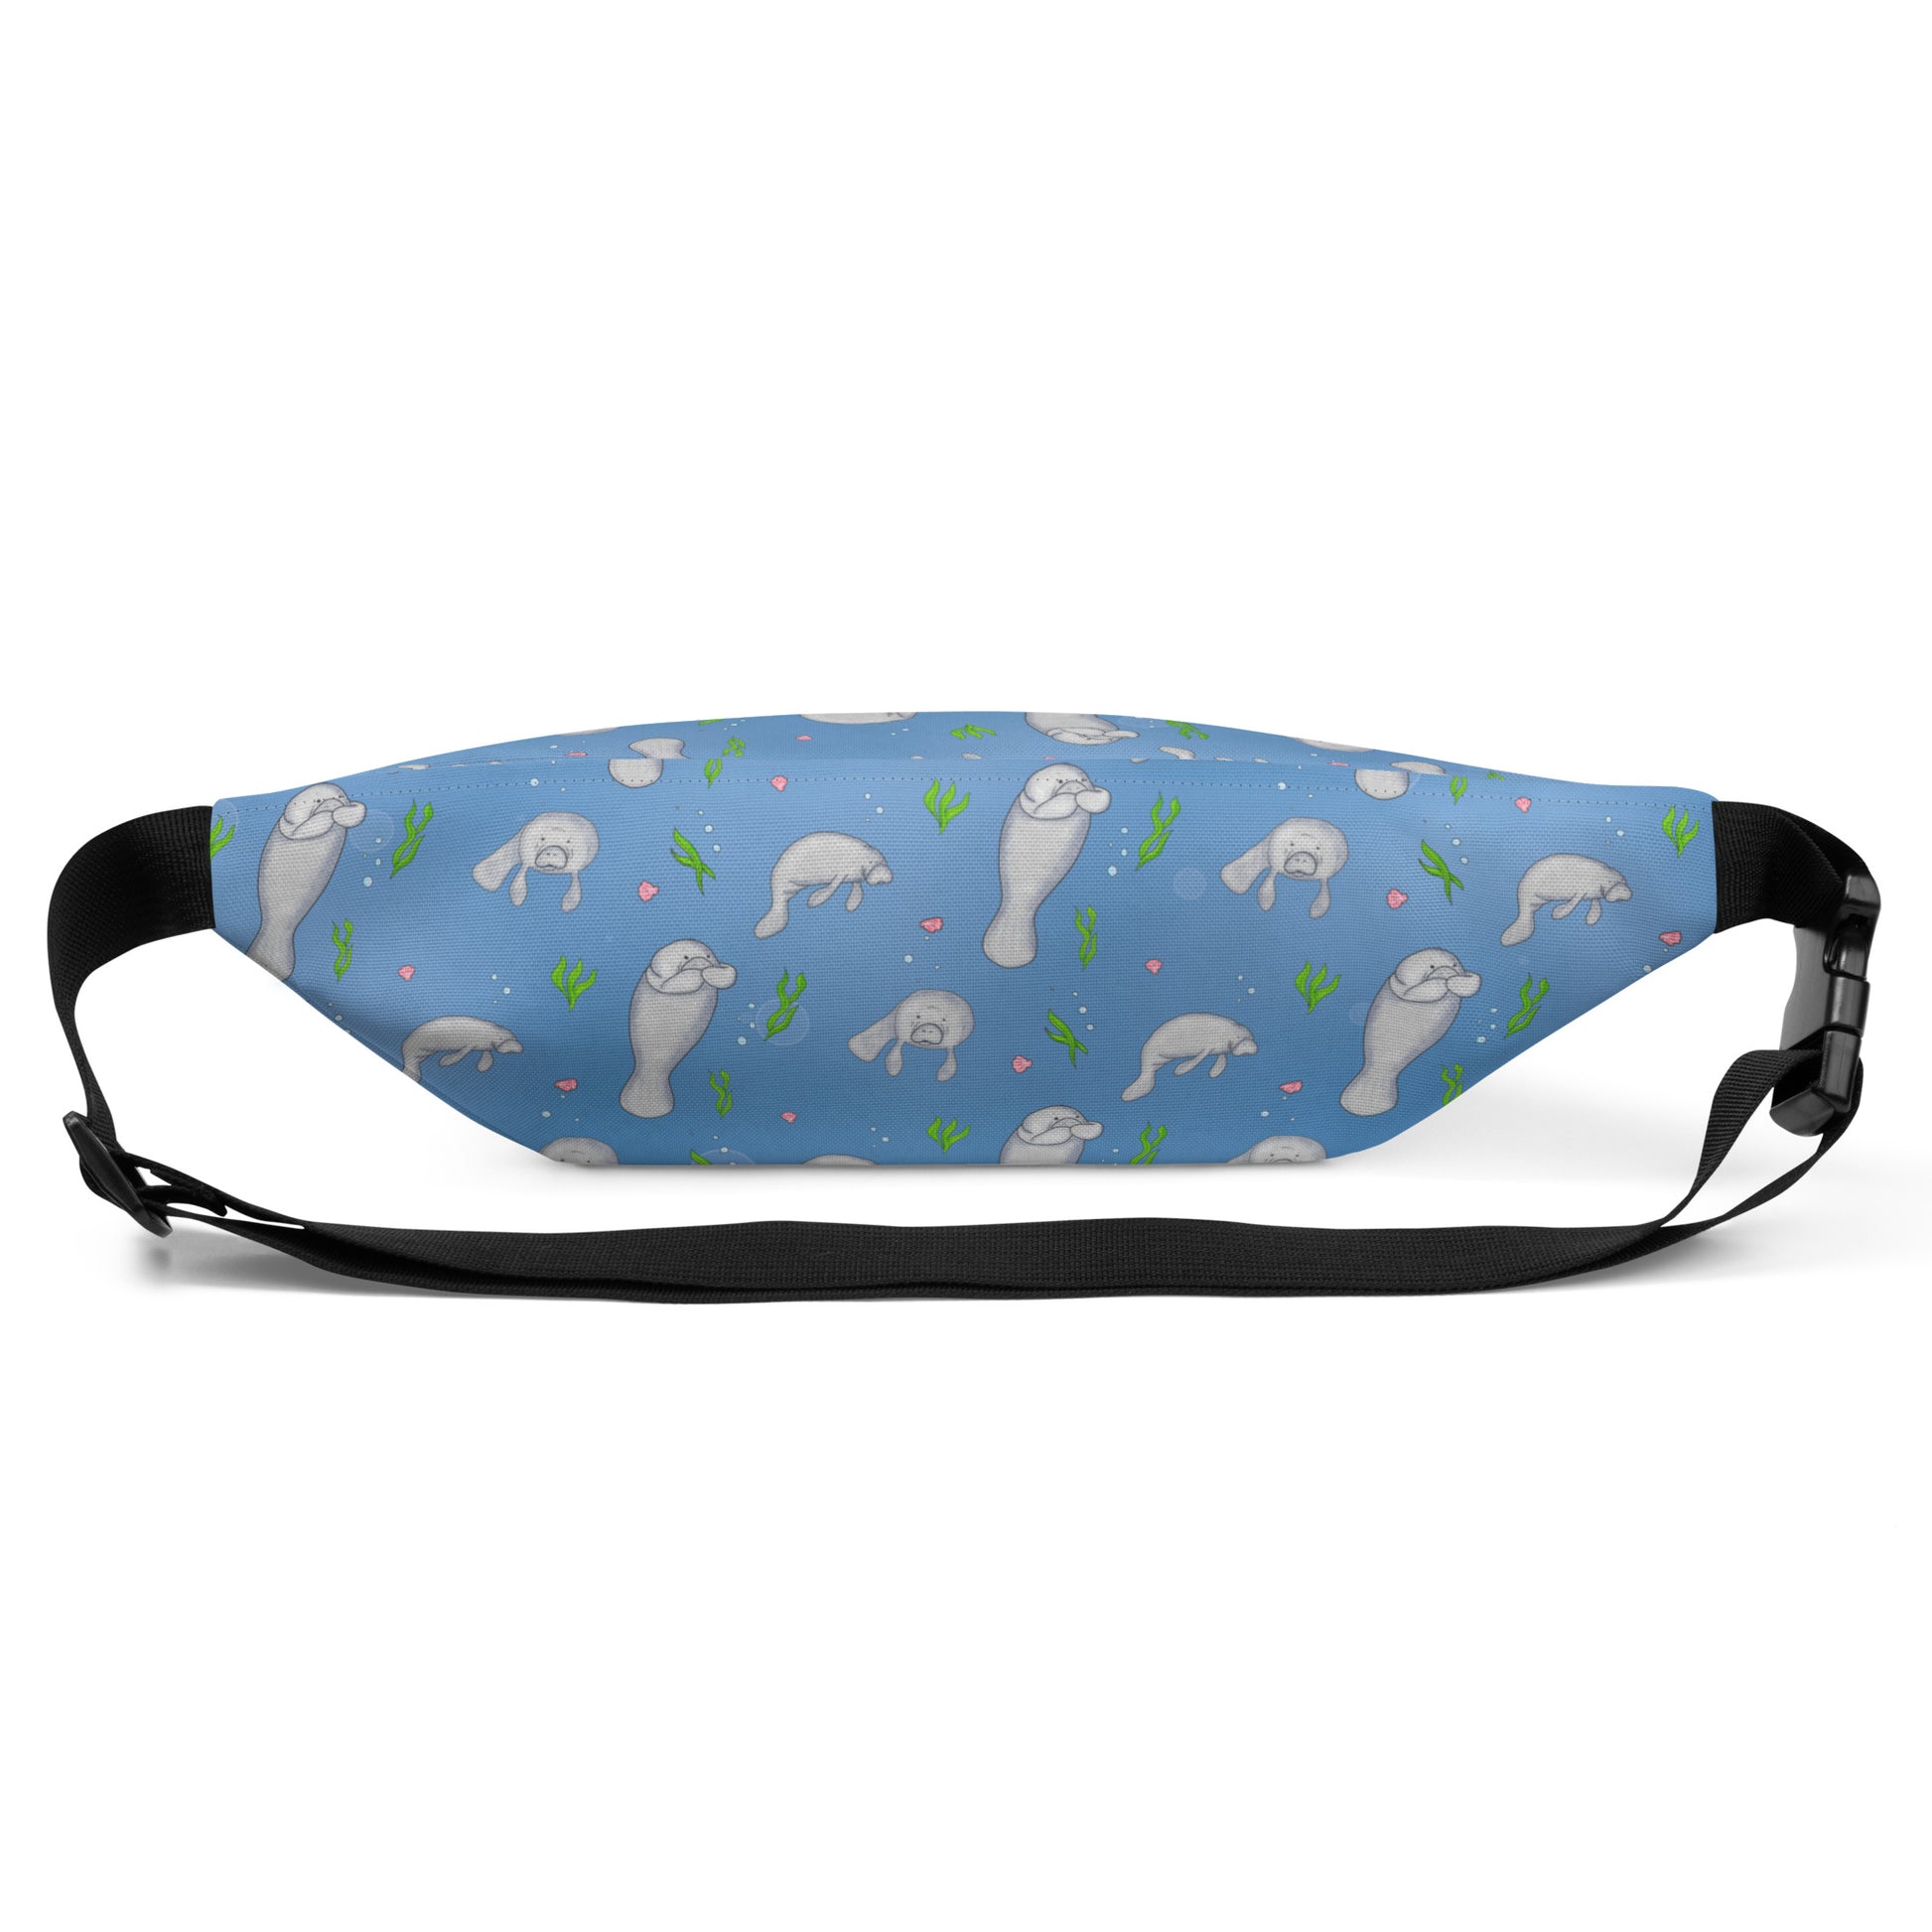 Cute manatee patterned belt bag with adjustable straps, zippered pouch, and small inner pocket. Back view of bag.